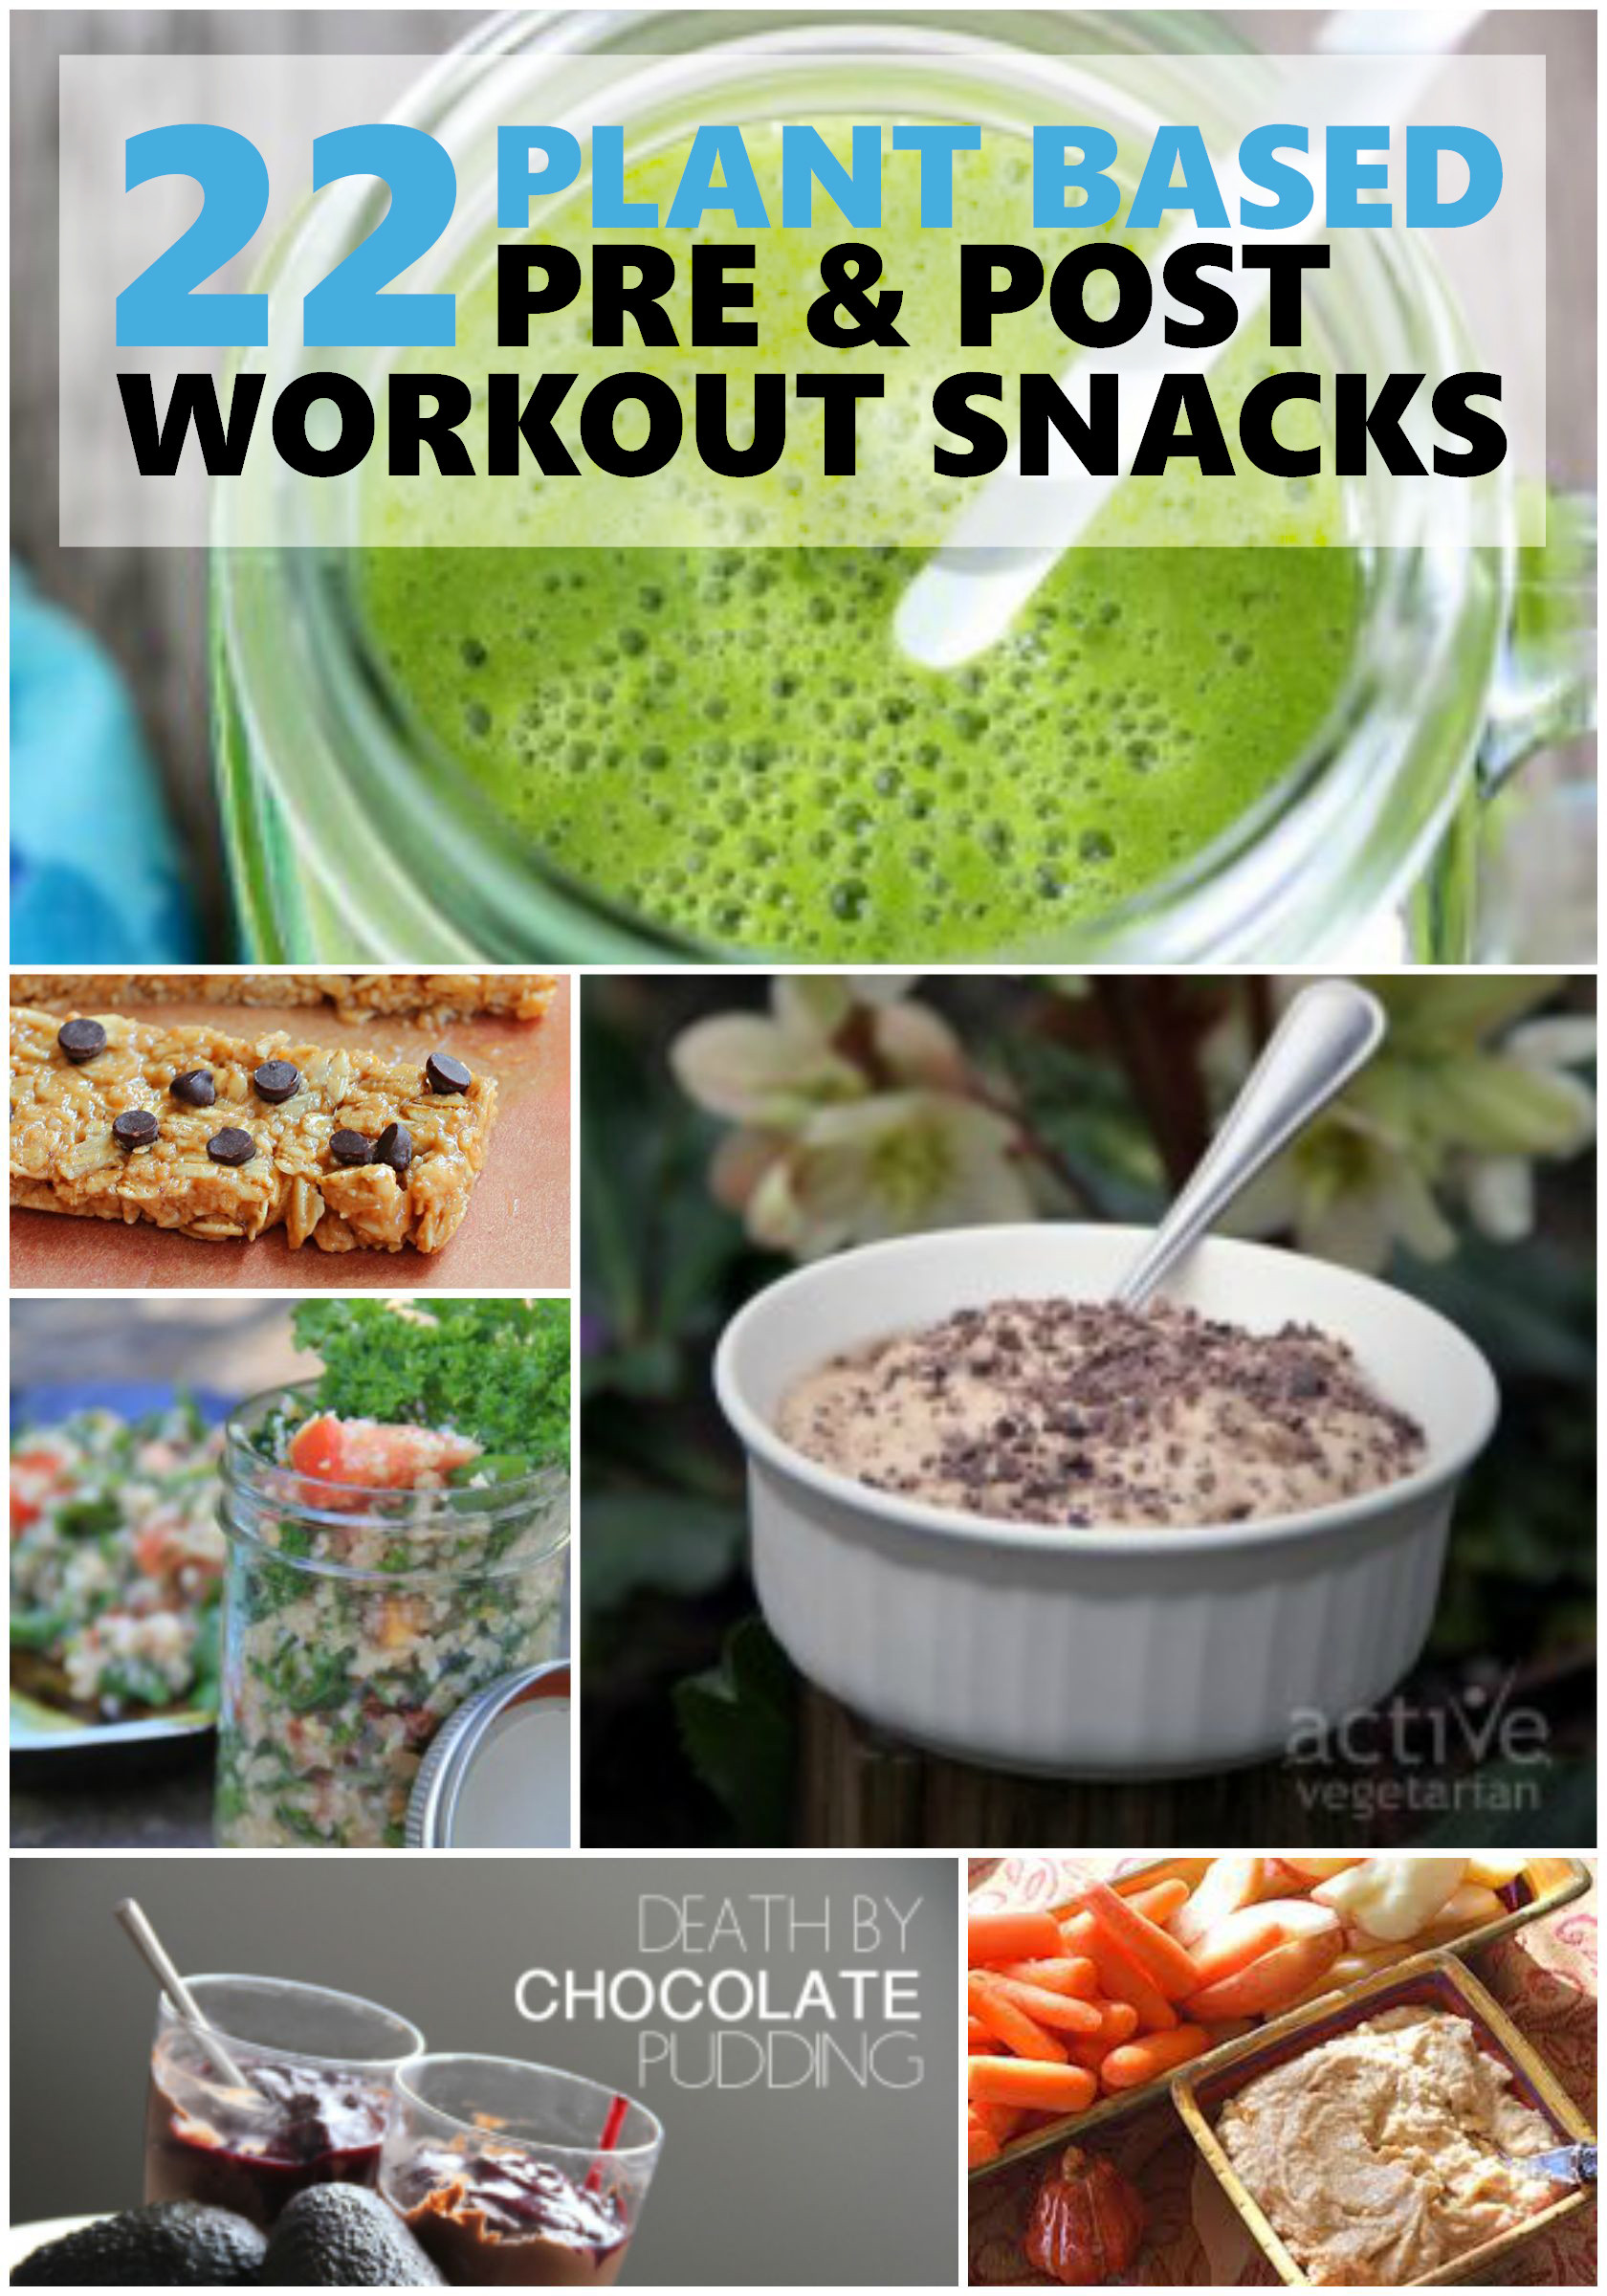 Plant Based Recipes Snacks
 22 Quick Plant Based Pre and Post Workout Snacks